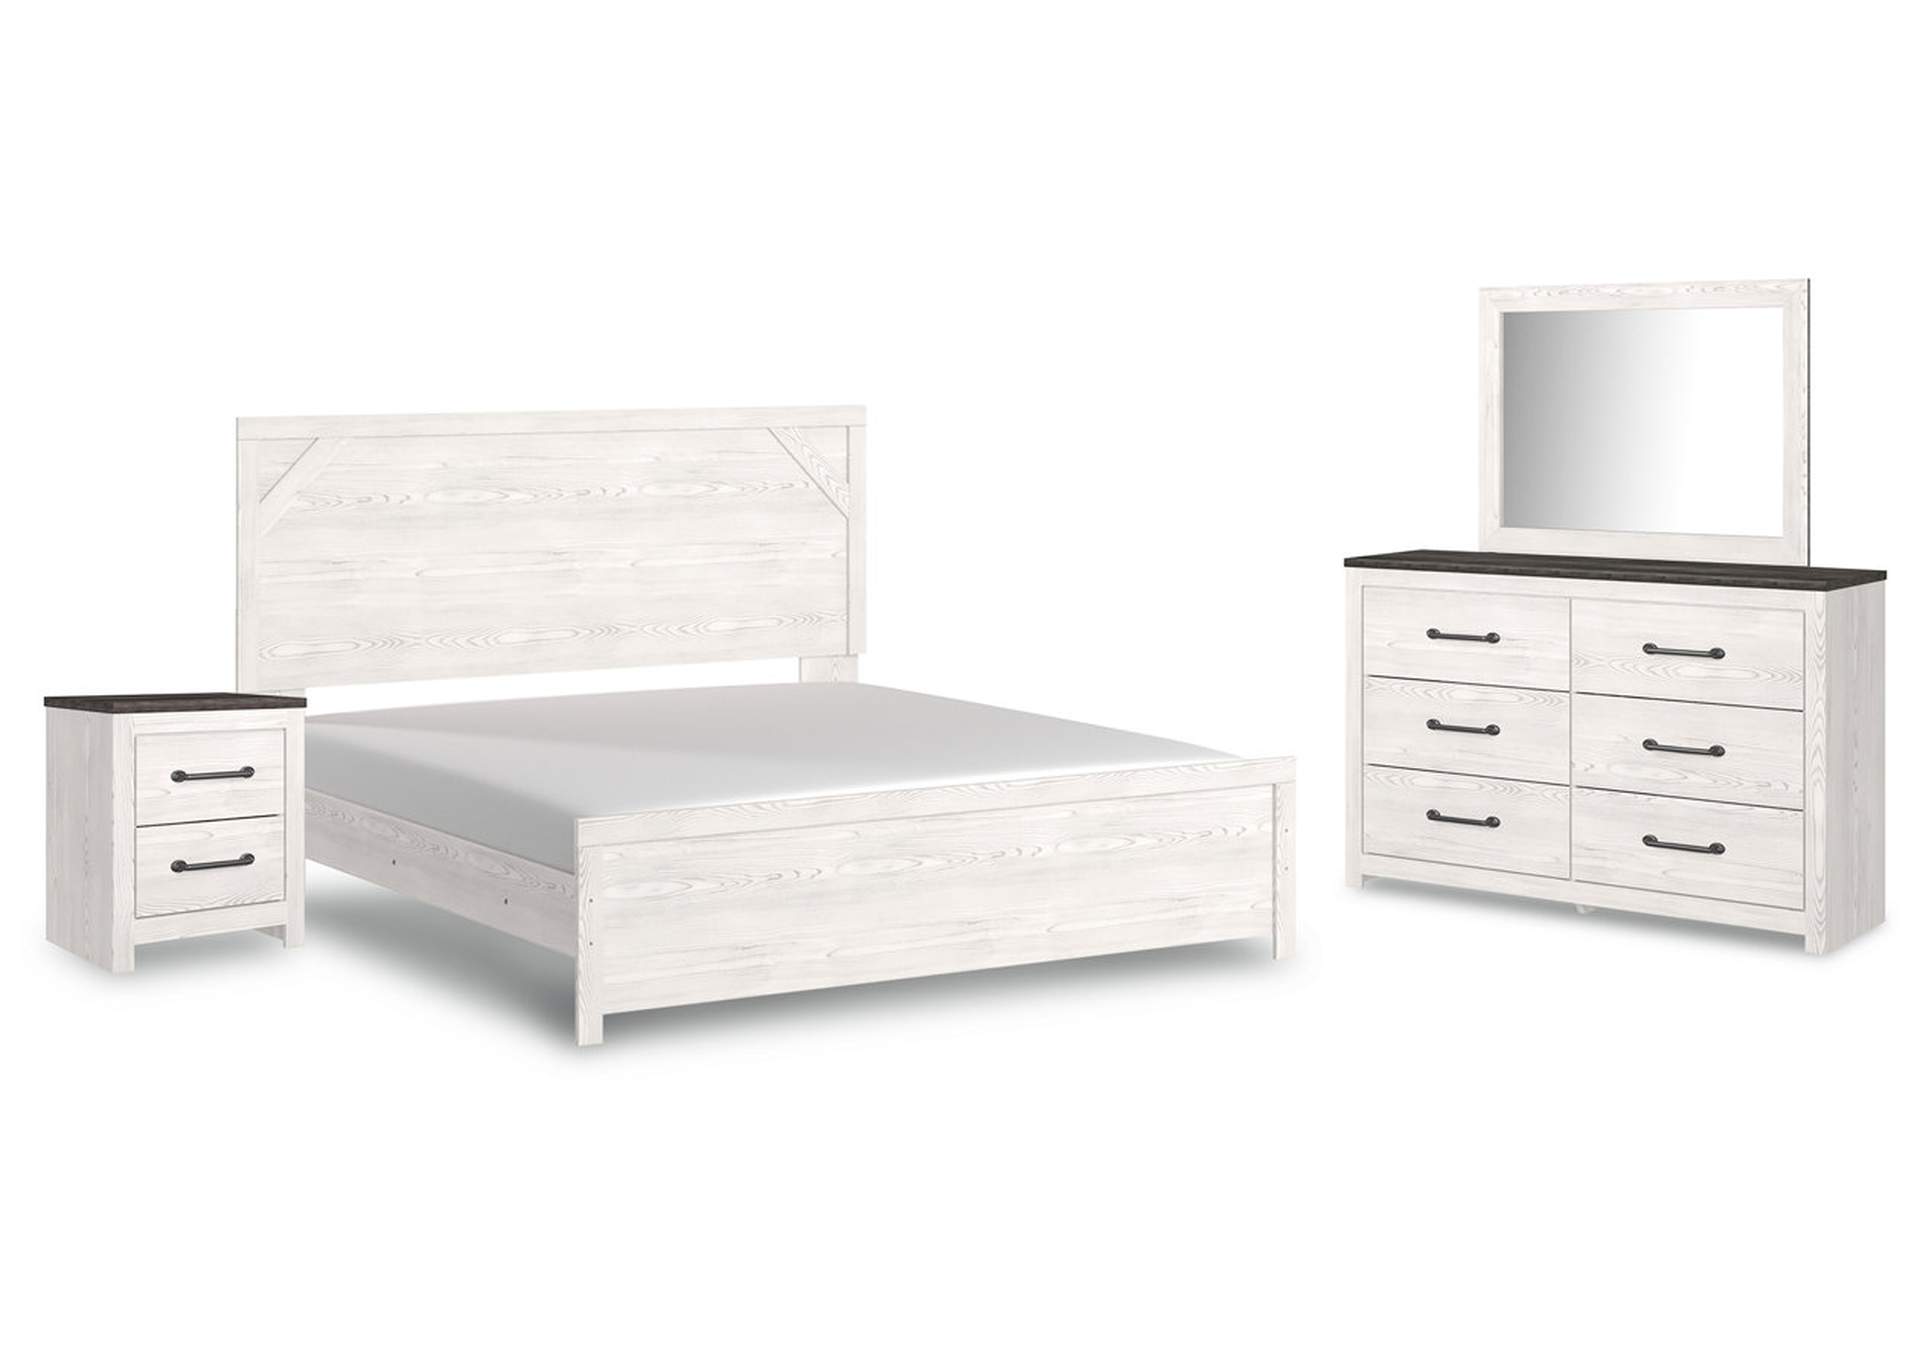 Gerridan King Panel Bed with Mirrored Dresser and Nightstand,Signature Design By Ashley